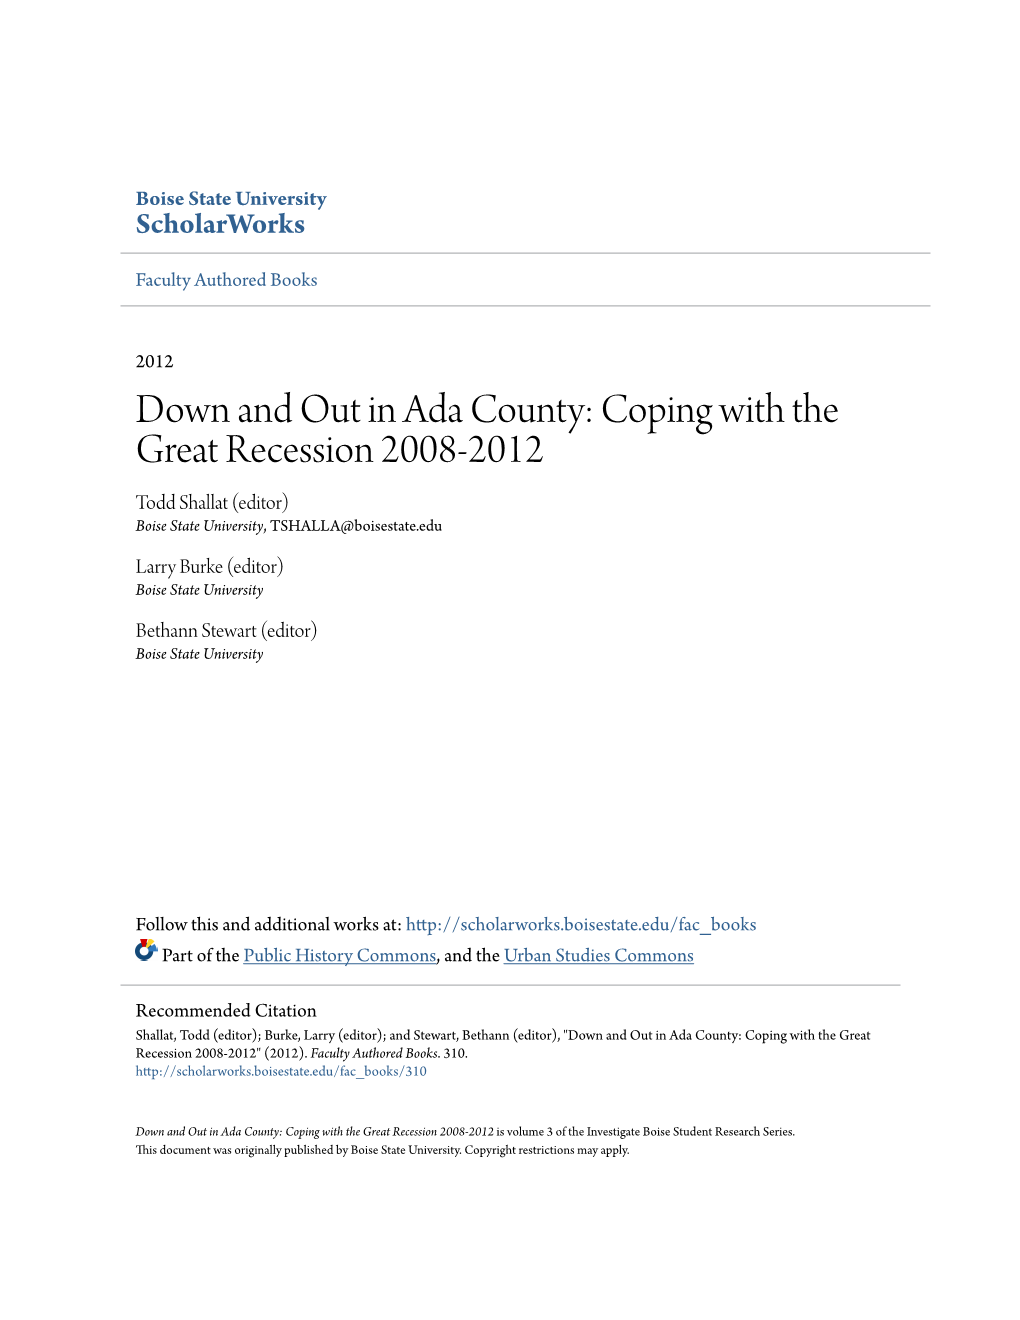 Down and out in Ada County: Coping with the Great Recession 2008-2012 Todd Shallat (Editor) Boise State University, TSHALLA@Boisestate.Edu